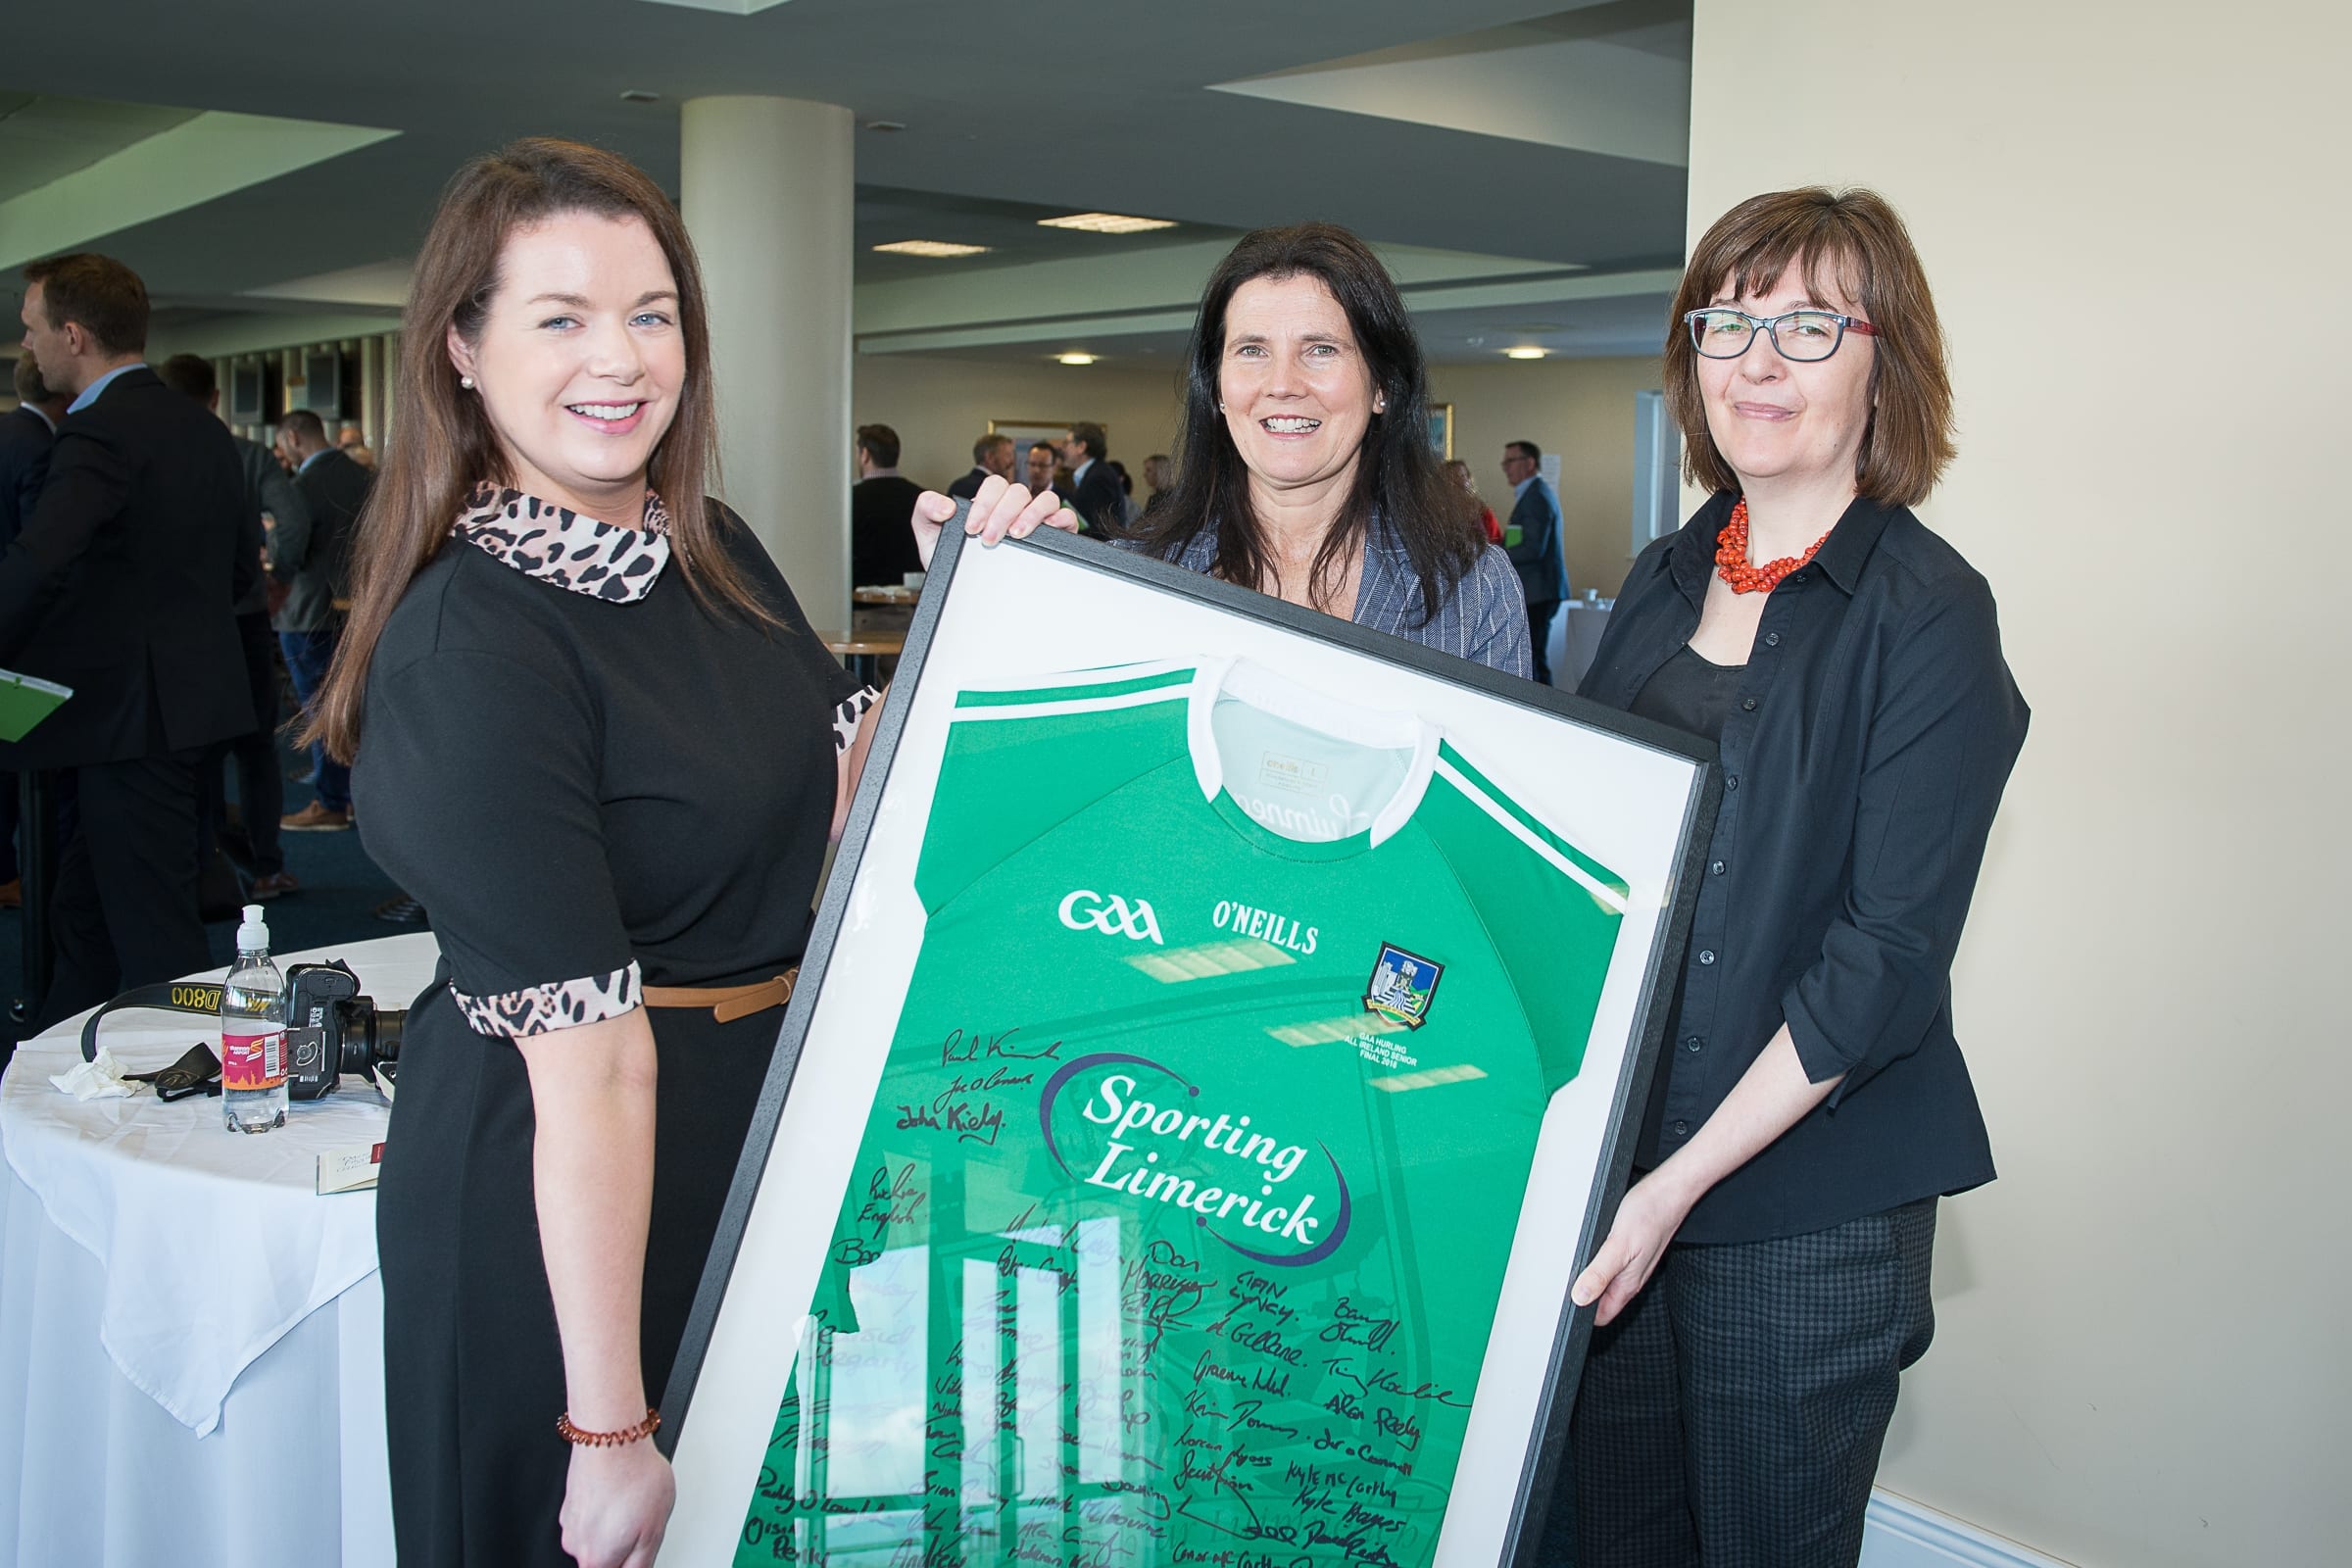 From Left to Right:  Upskilling the MidWest with John Kiely which took place on the 30th April in function room of the Limerick Racecourse: Amy Regan - Winner of Signed Limerick Jersey, Anne Morris - Limerick Chamber Skillnet, Gráinne Walsh - ICBE Skillnet